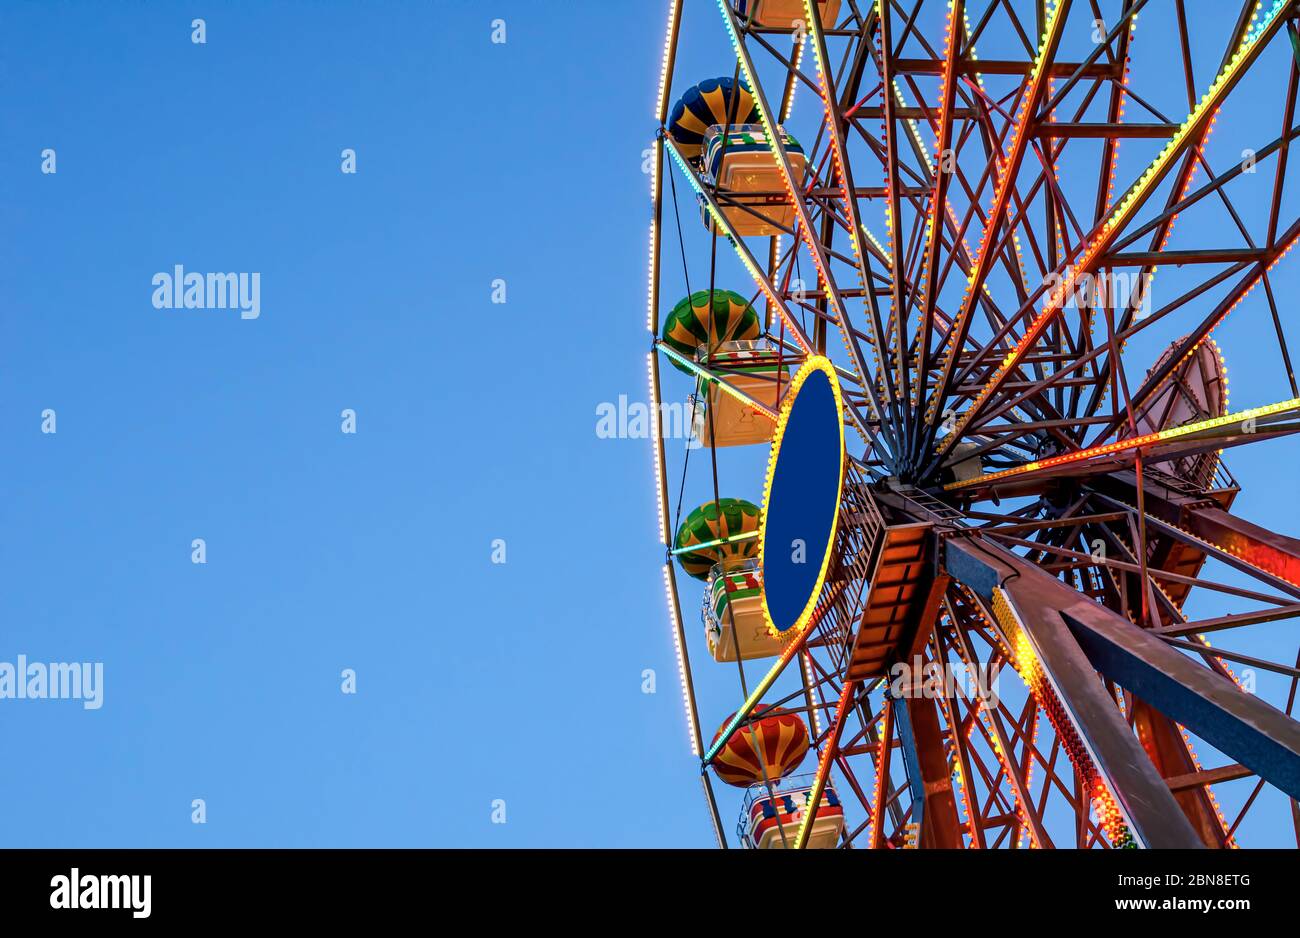 Ferris wheel on a background of sky. Stock Photo